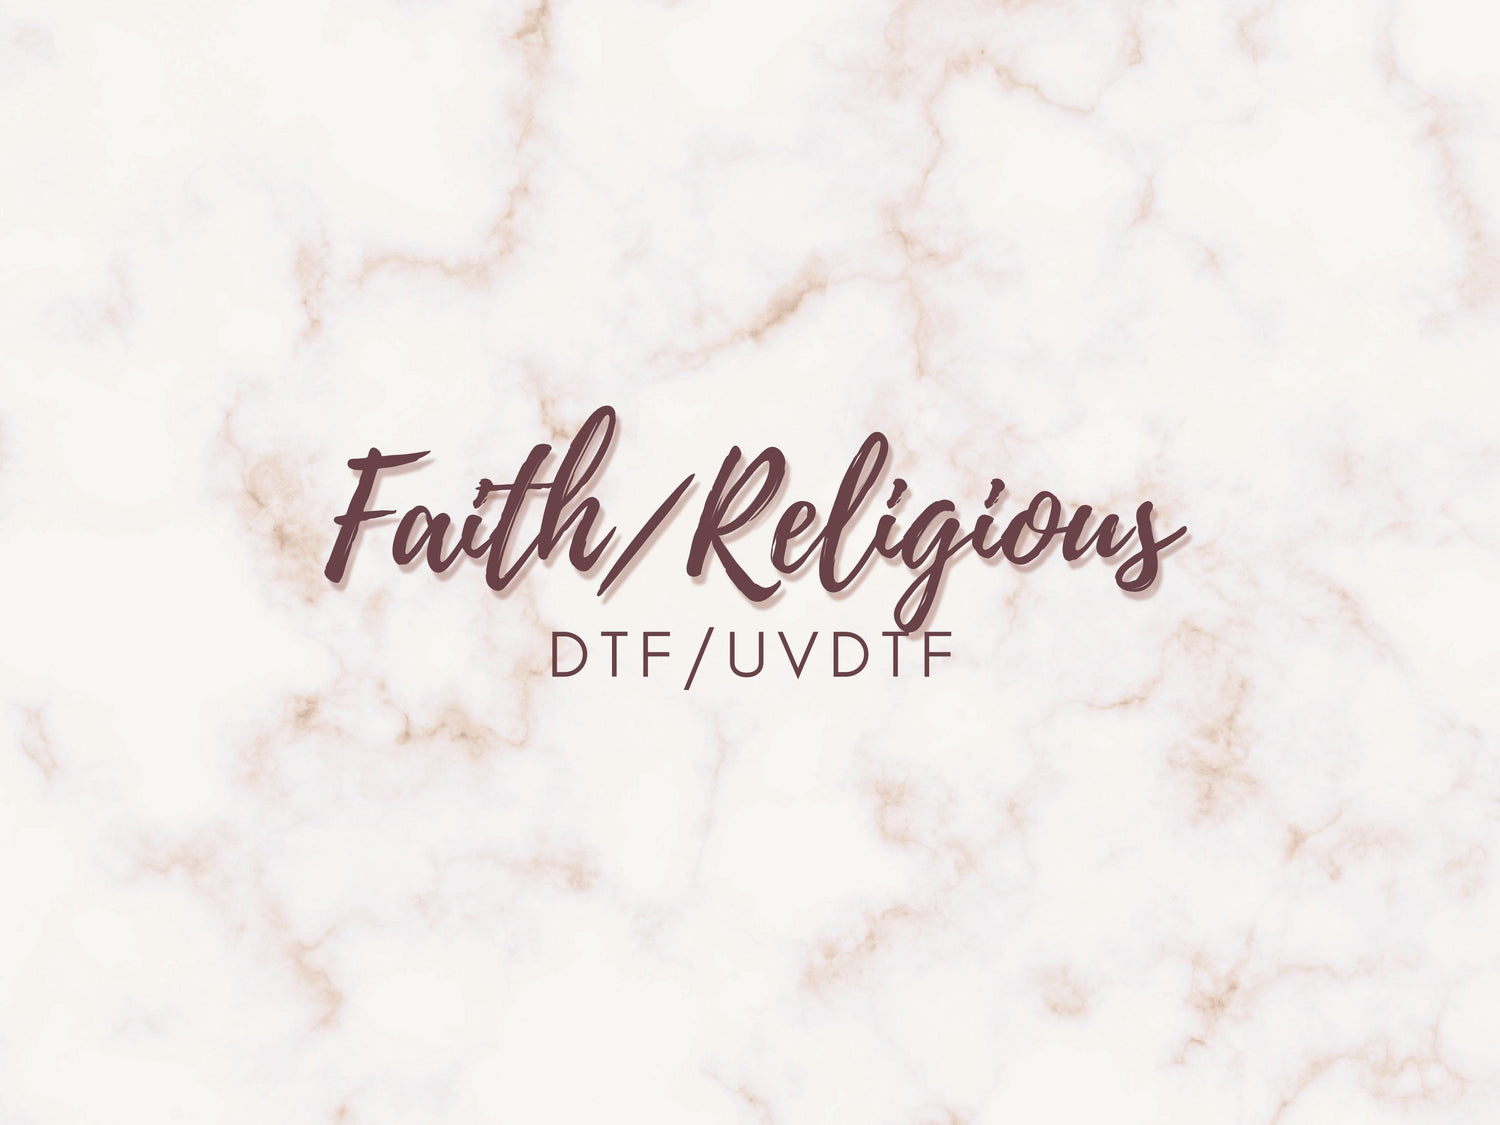 Faith or Religion Inspired DTF Transfers and UVDTF Decals